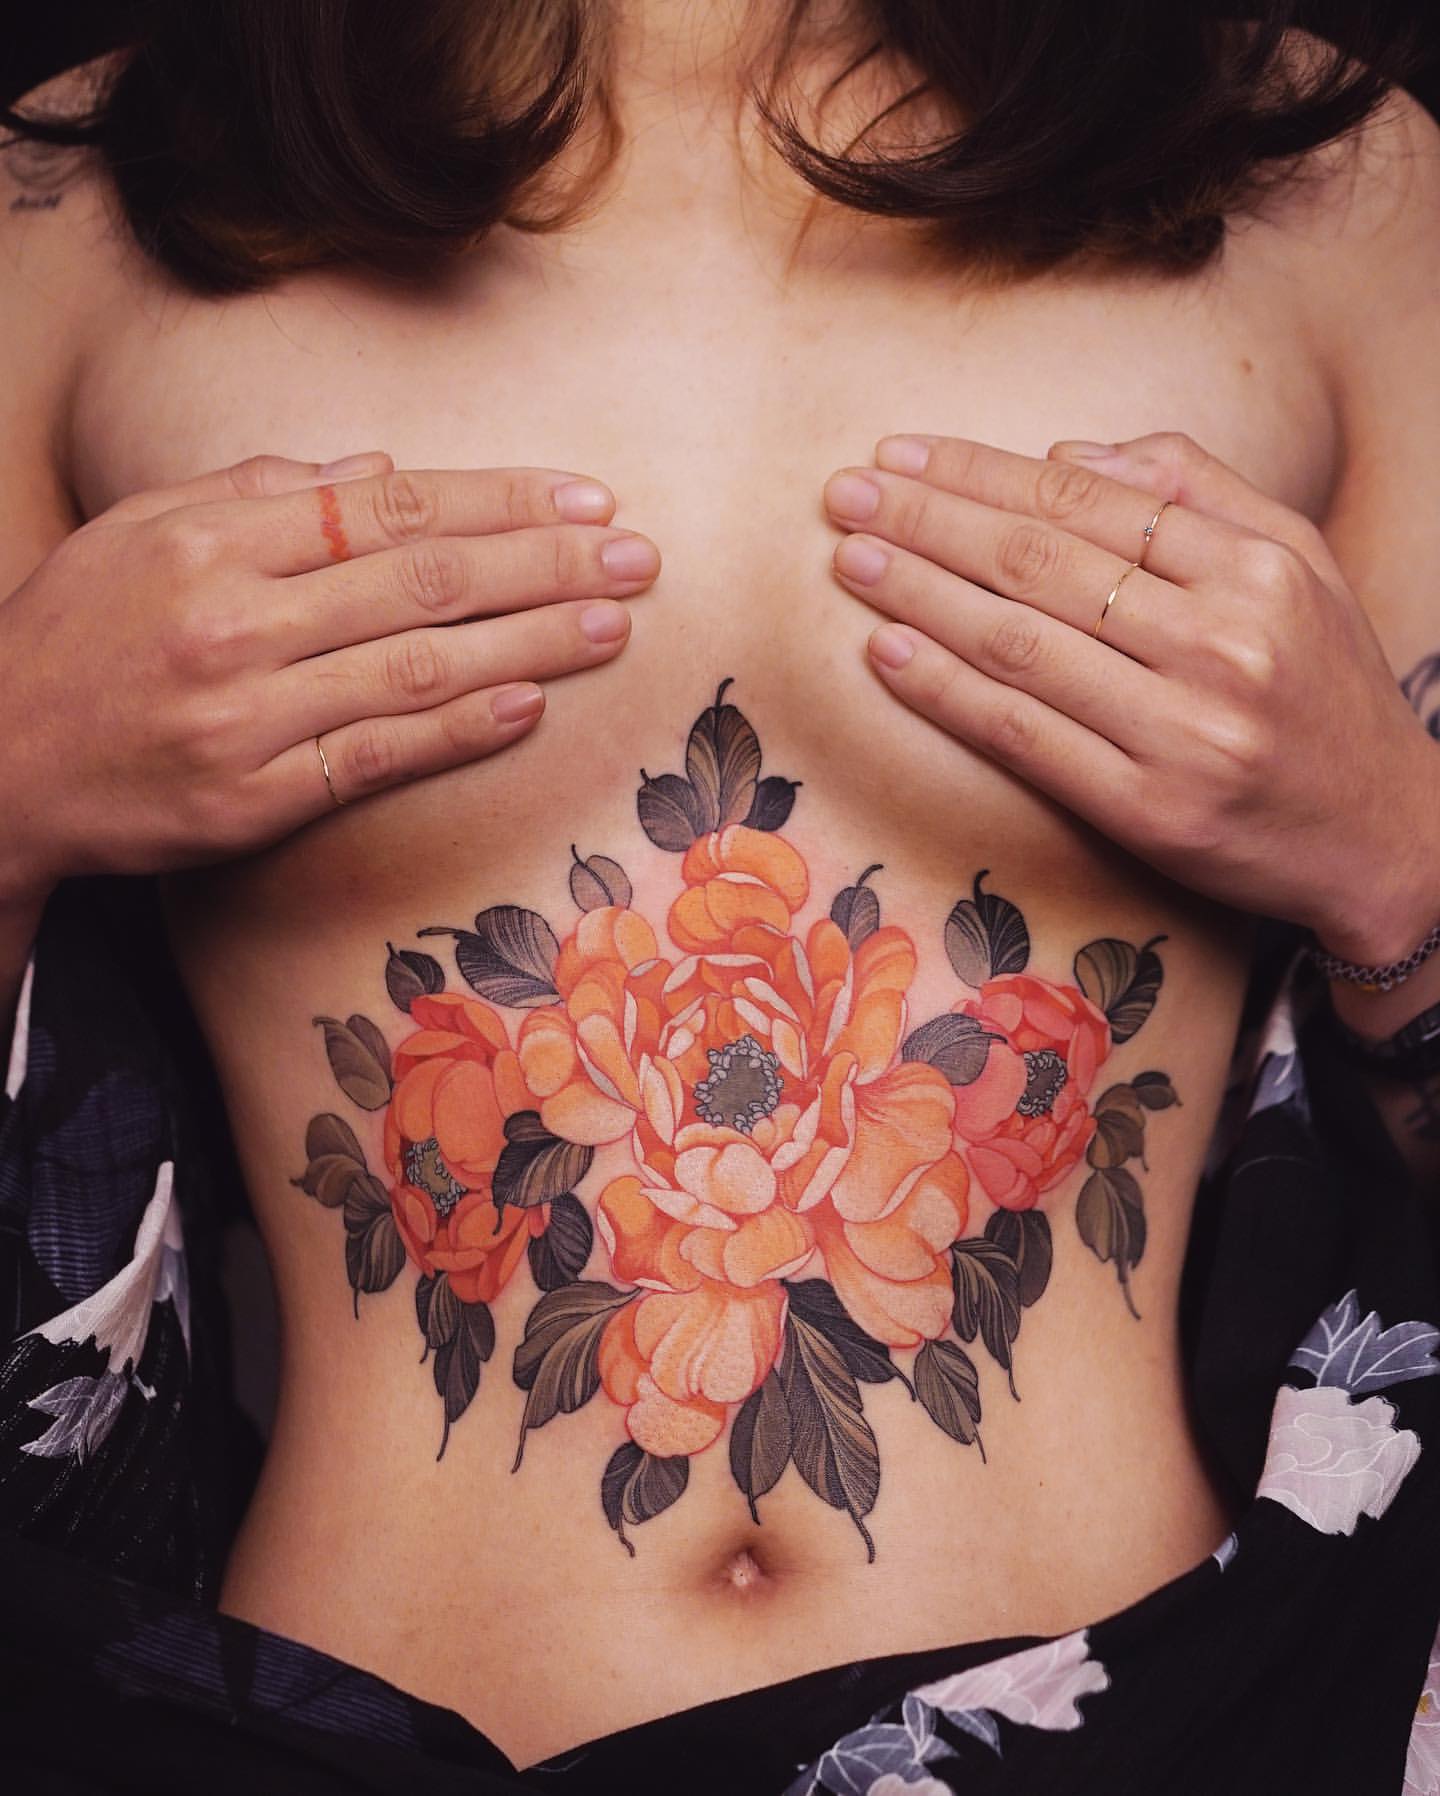 Sexy Tattoos for Women 62